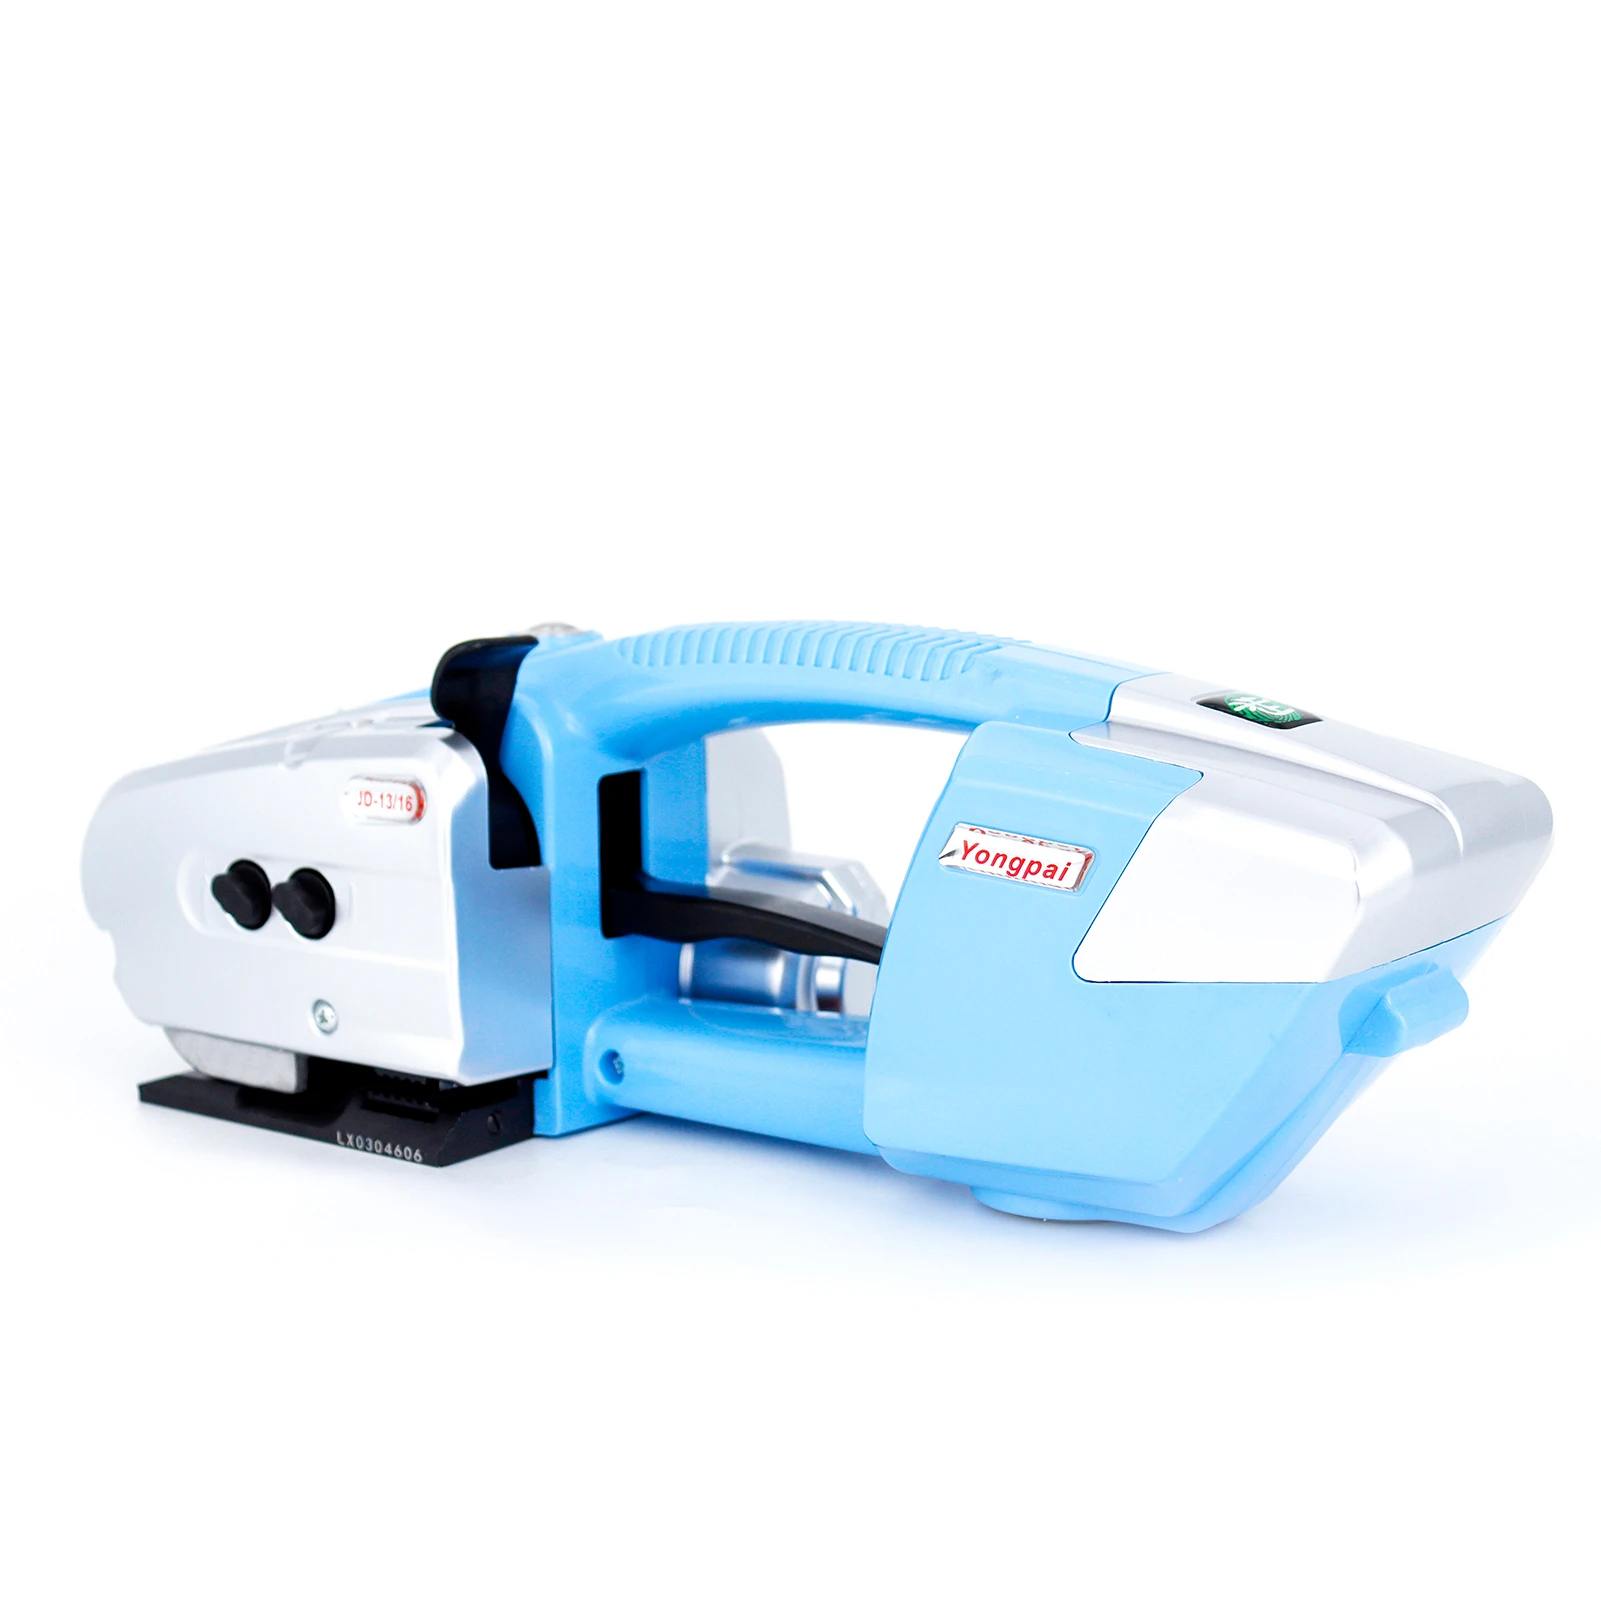 BAOSHISHAN Electric Welding Strapping Tool for 1/2 in-5/8 in PP/PET Straps Battery Powered Automatic Hot Melting Strapping Banding Machine Dark Blue 